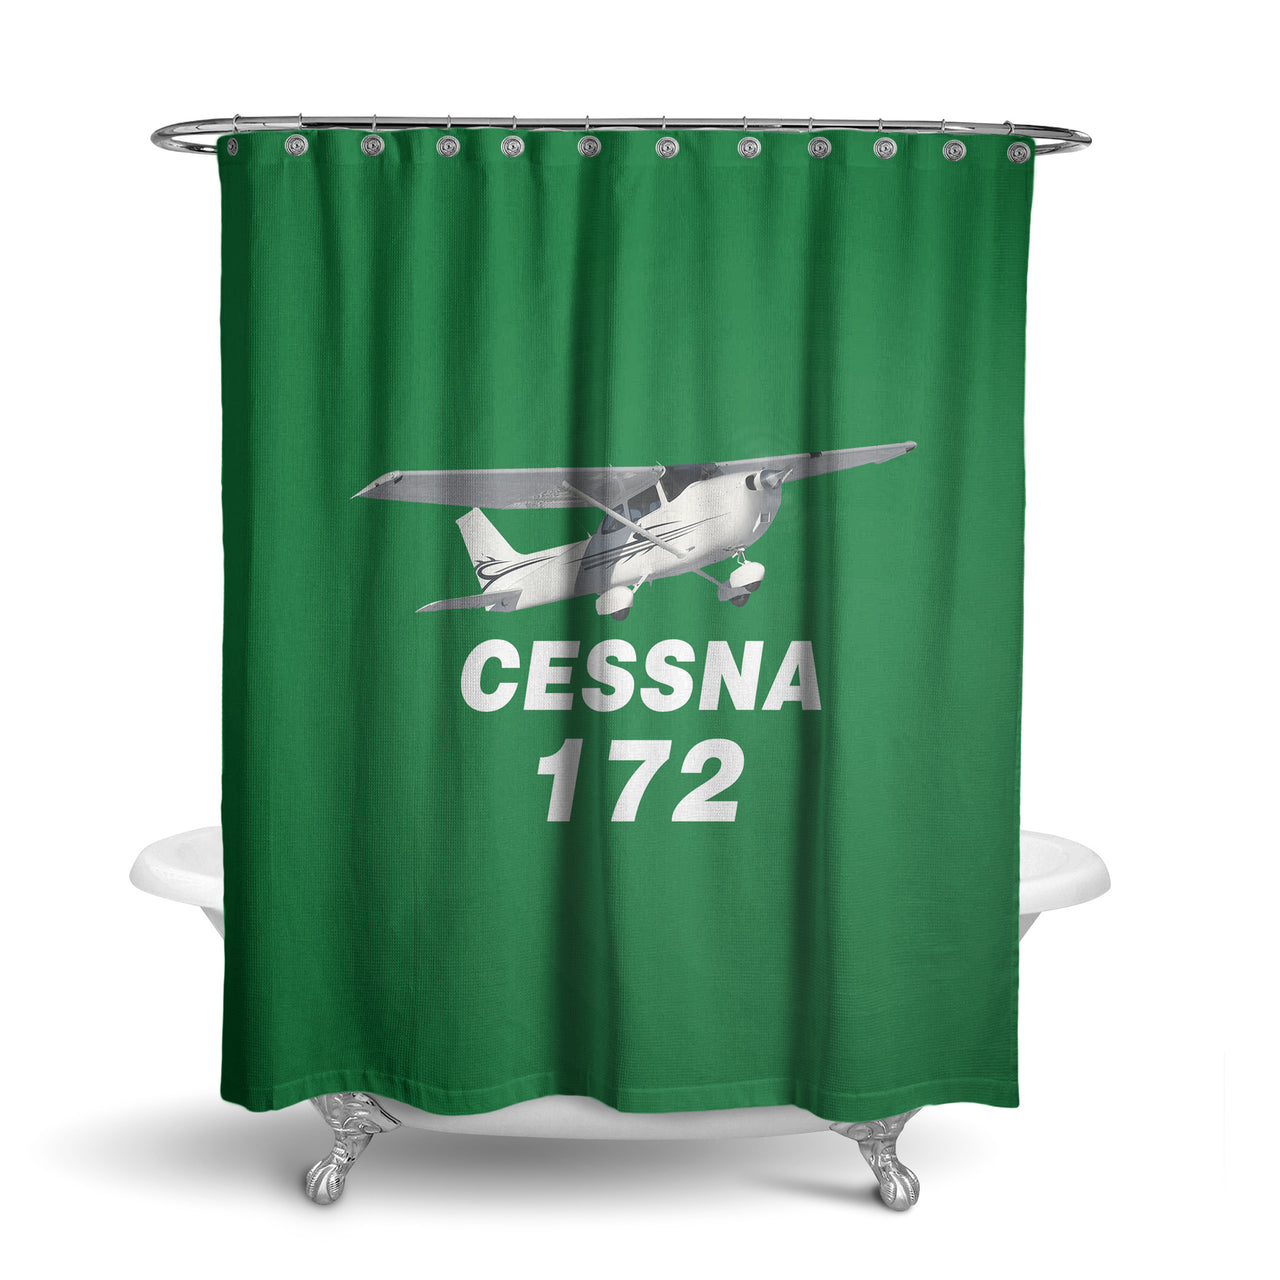 The Cessna 172 Designed Shower Curtains